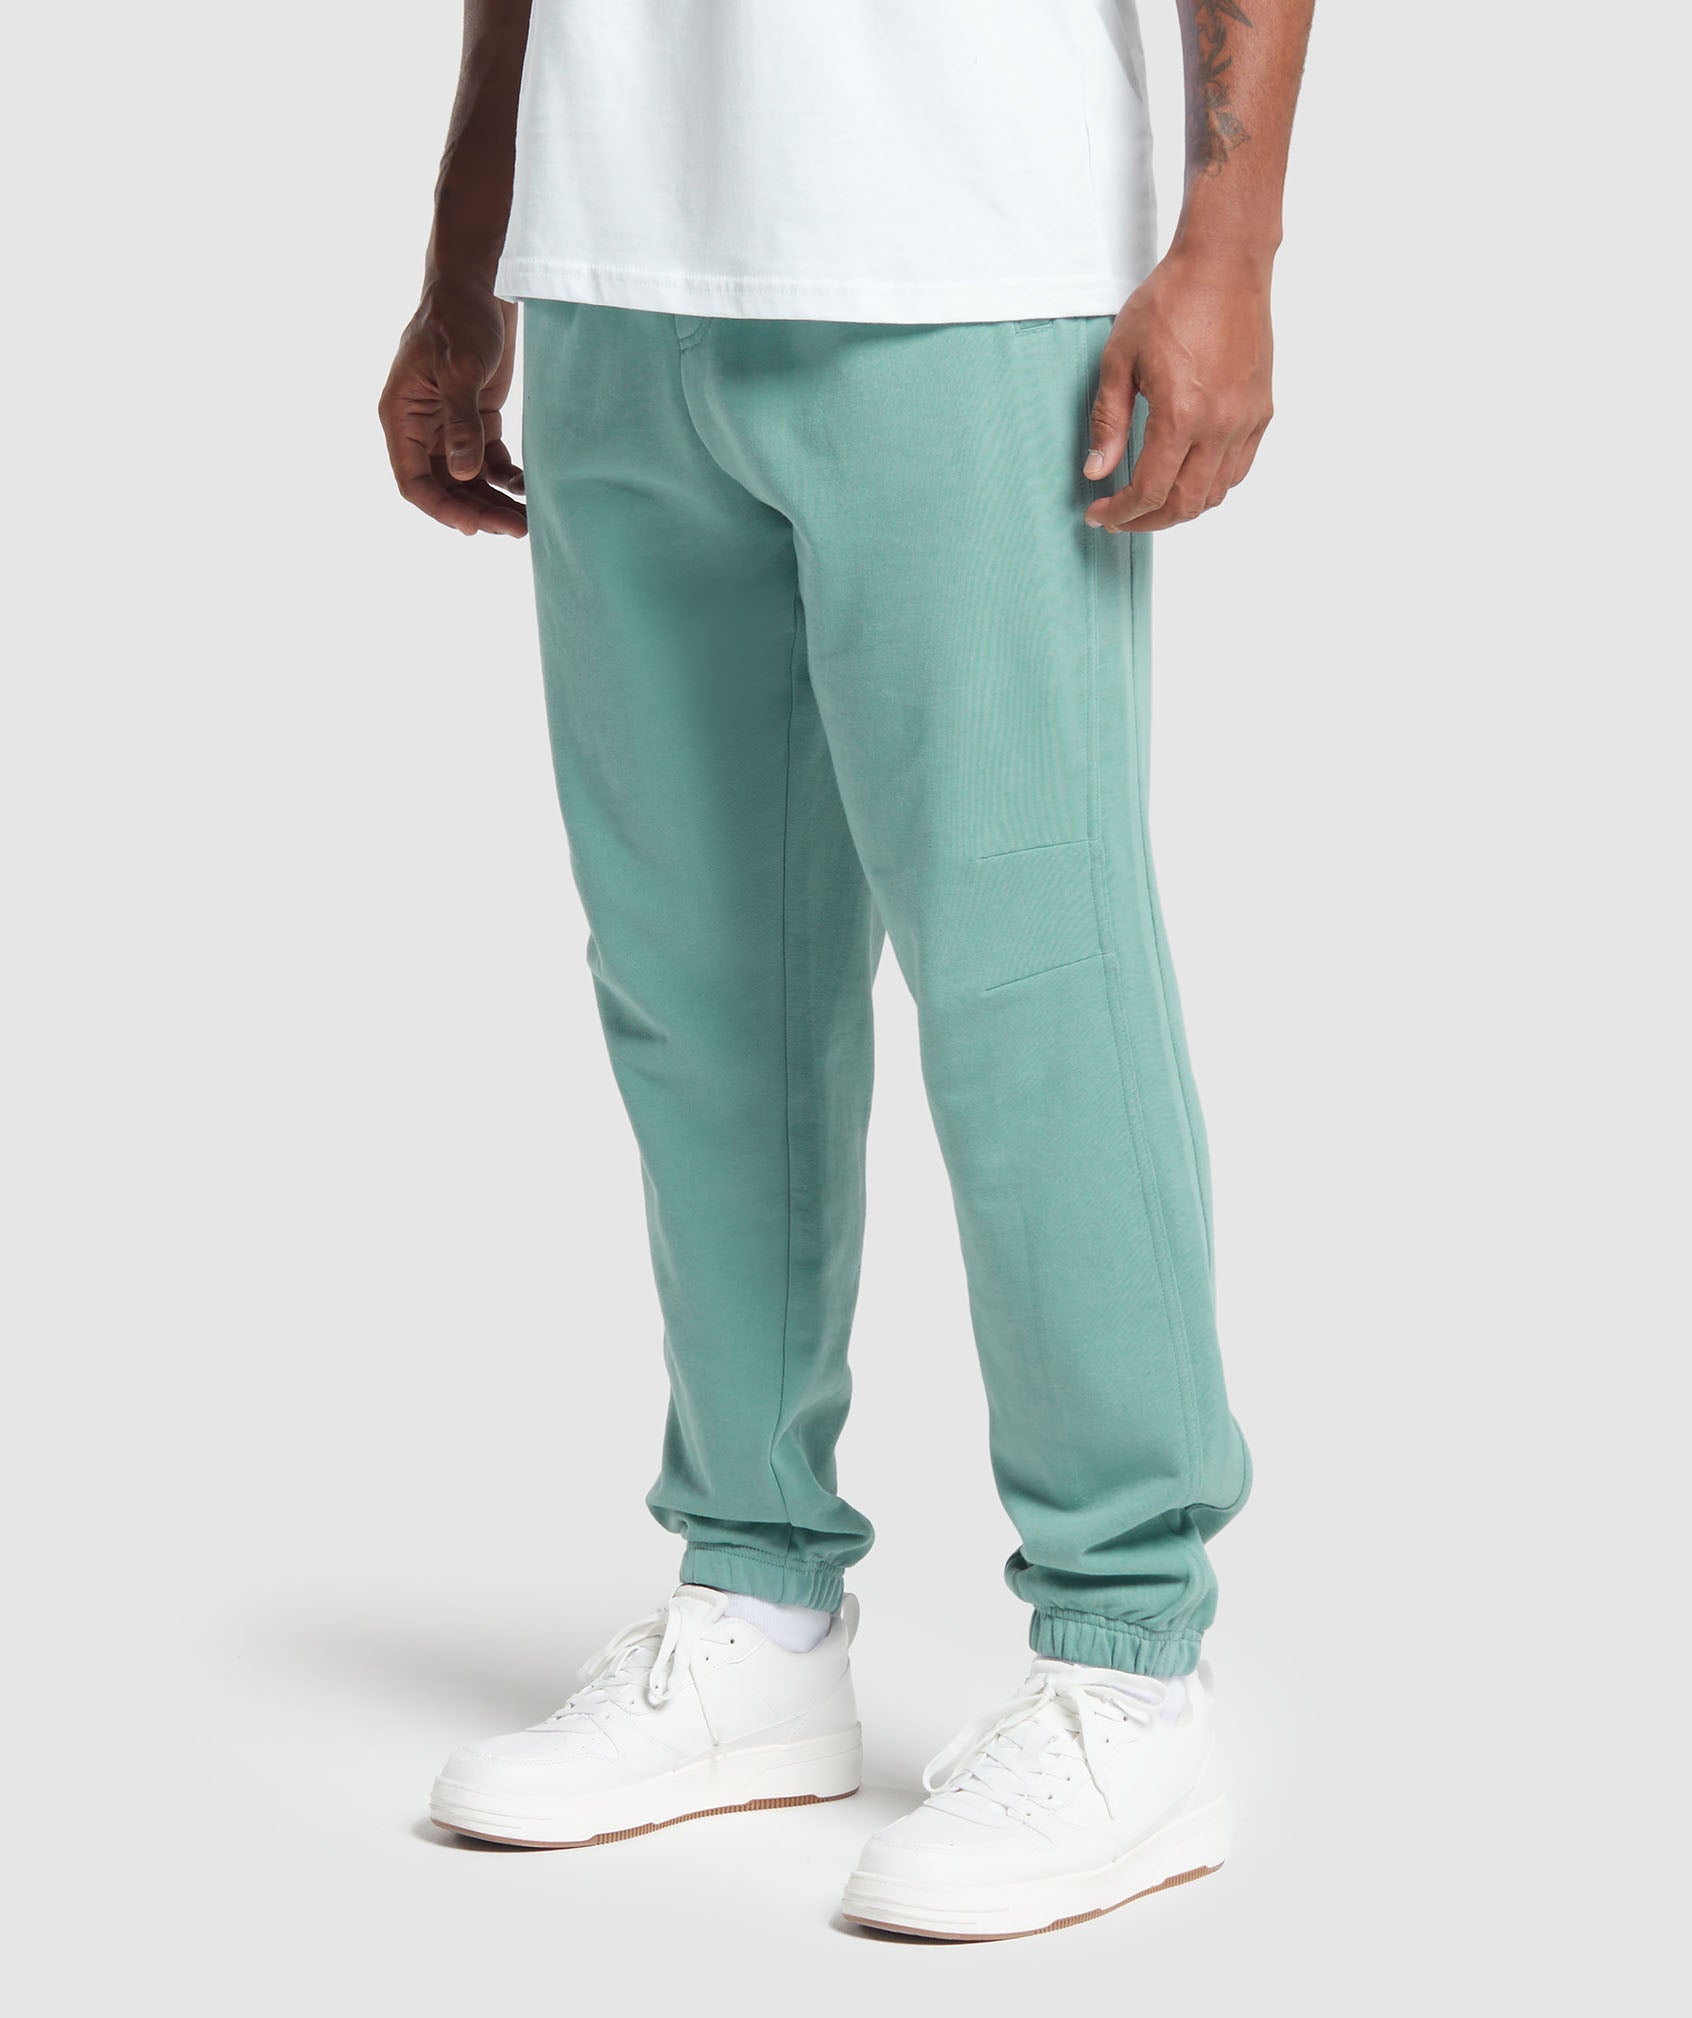 Rest Day Essentials Joggers in Duck Egg Blue - view 2